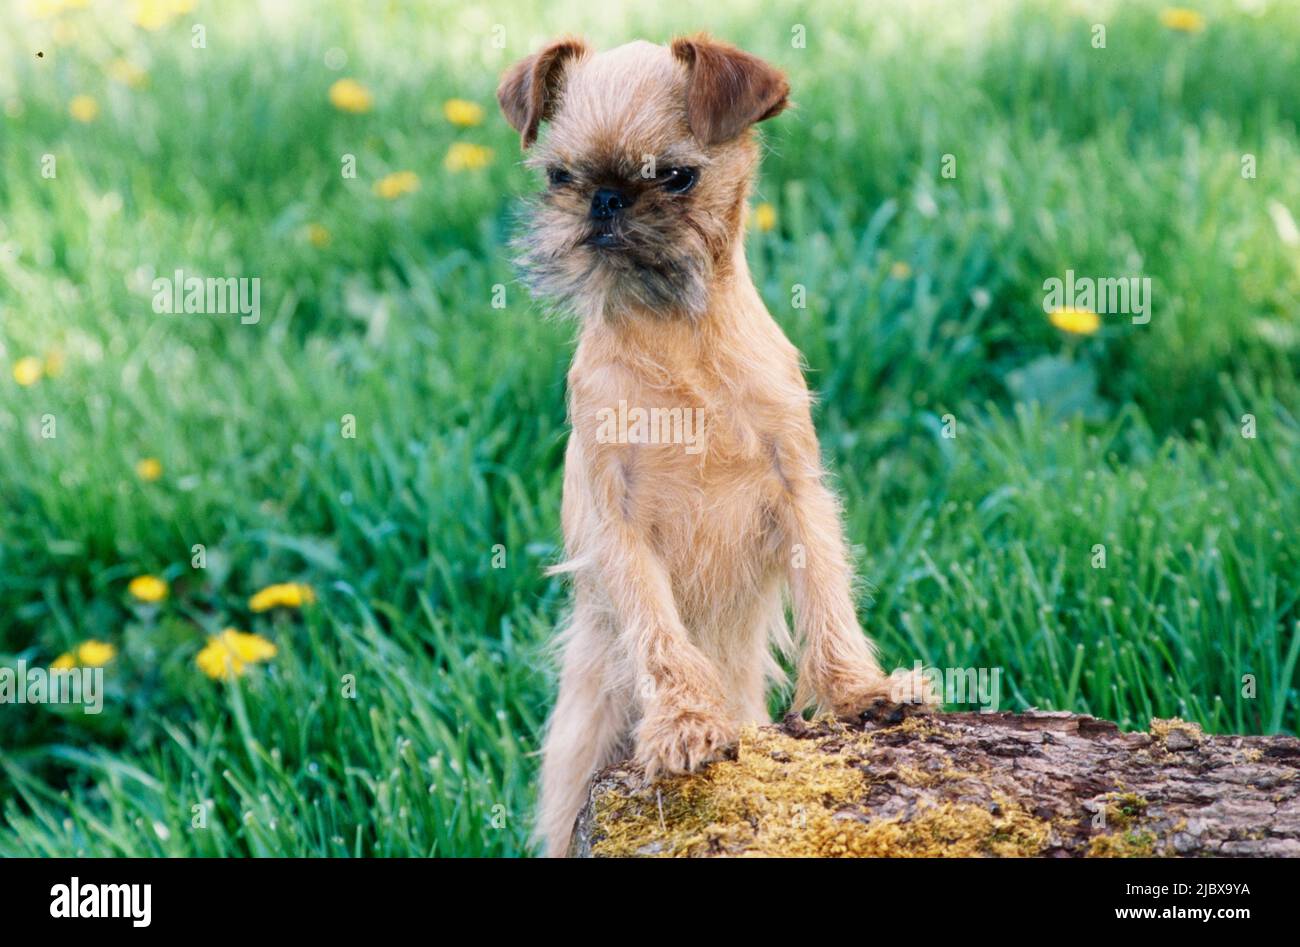 A Brussels Griffon with its paws on a tree stump with green grass and yellow flowers in the background Stock Photo